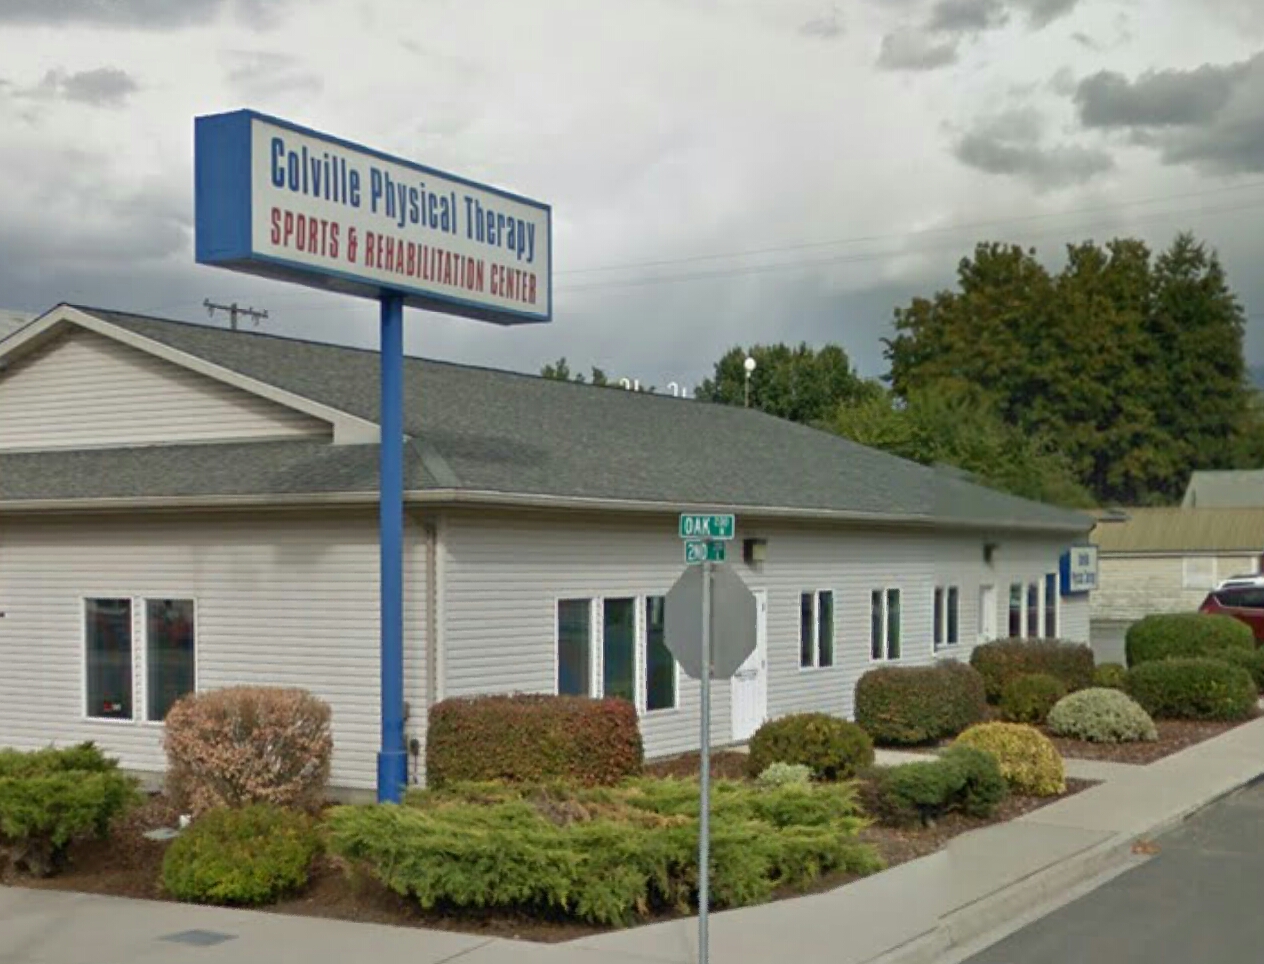 Colville Physical Therapy 217 E 2nd Ave, Colville Washington 99114